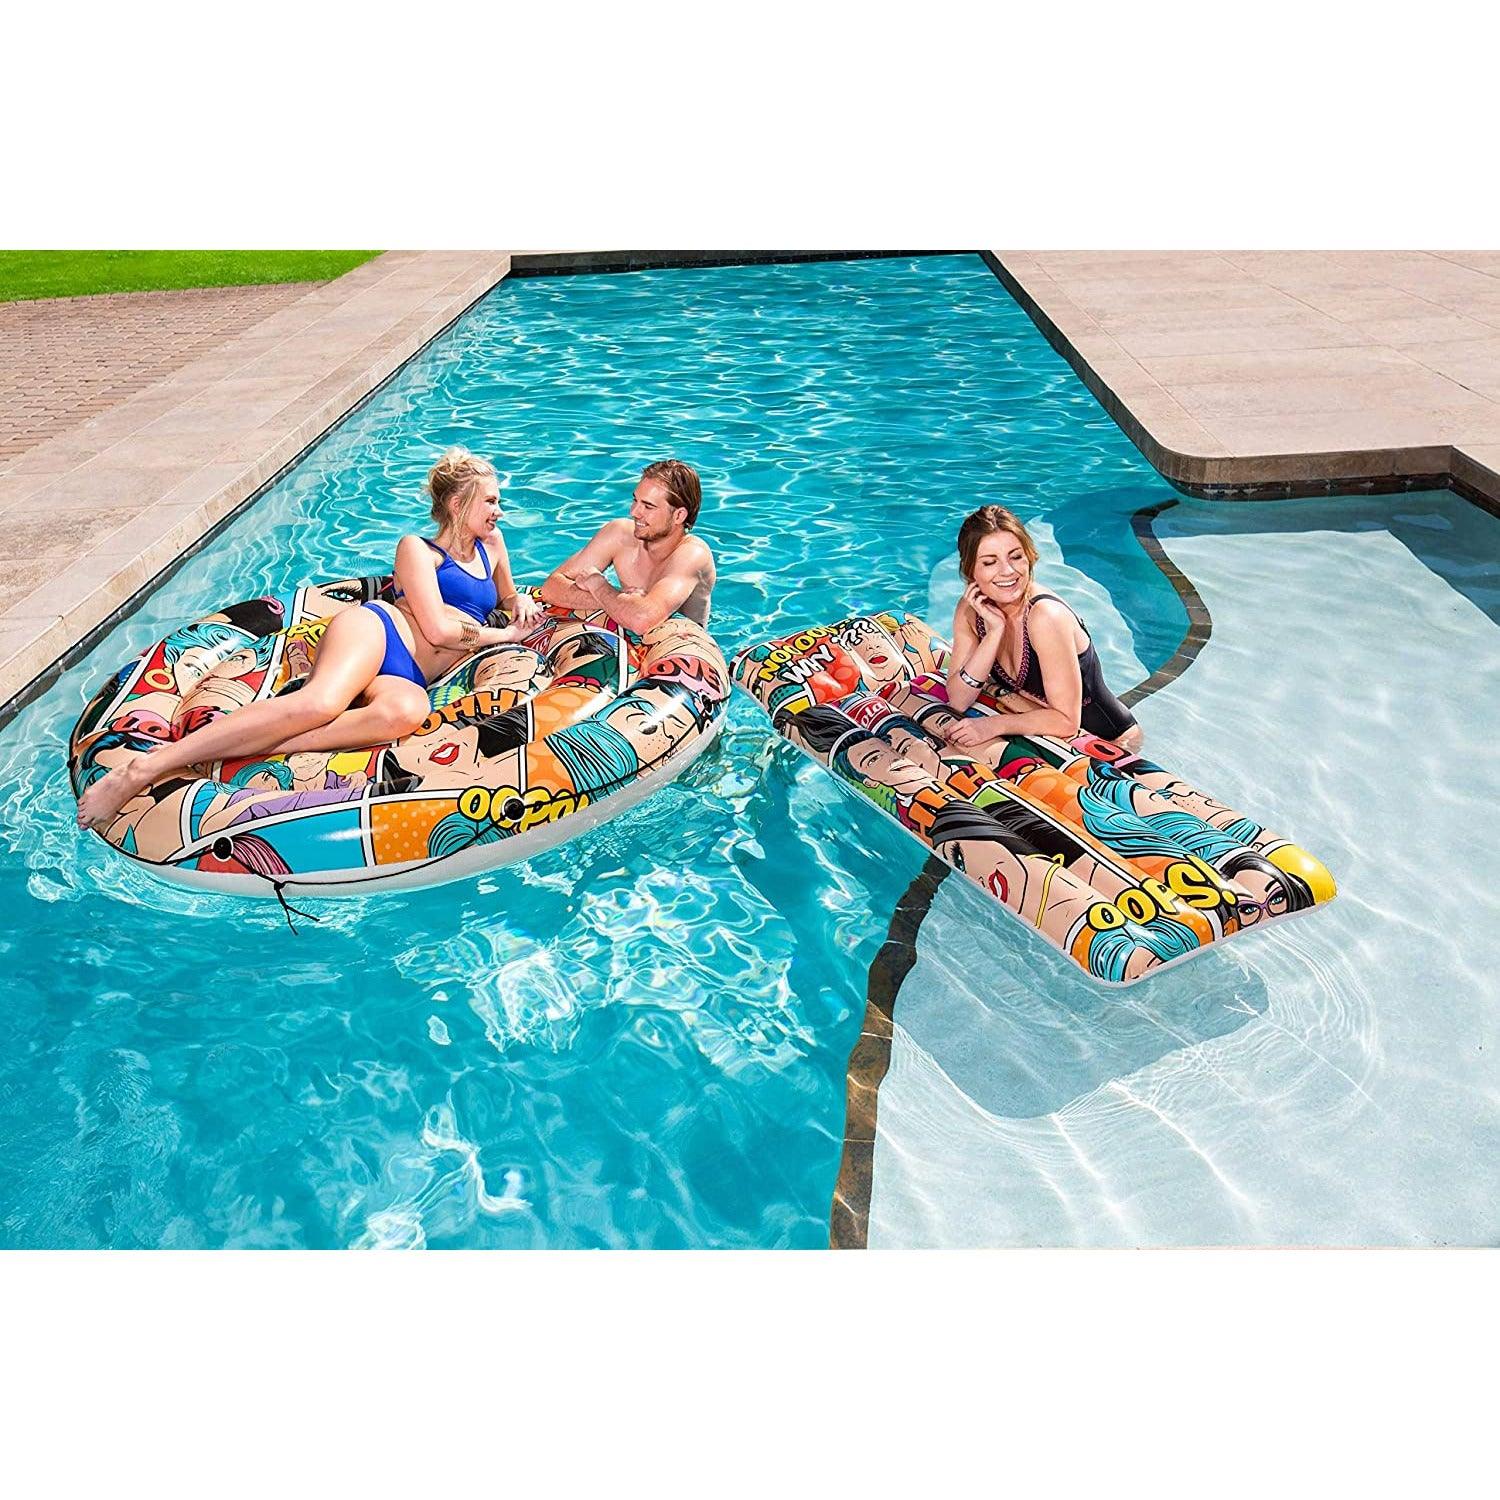 Bestway 43264 Inflatable Pool Mat with Comics Print - BumbleToys - 8-13 Years, Boys, Eagle Plus, Floaters, Island, Pre-Order, Sand Toys Pools & Inflatables